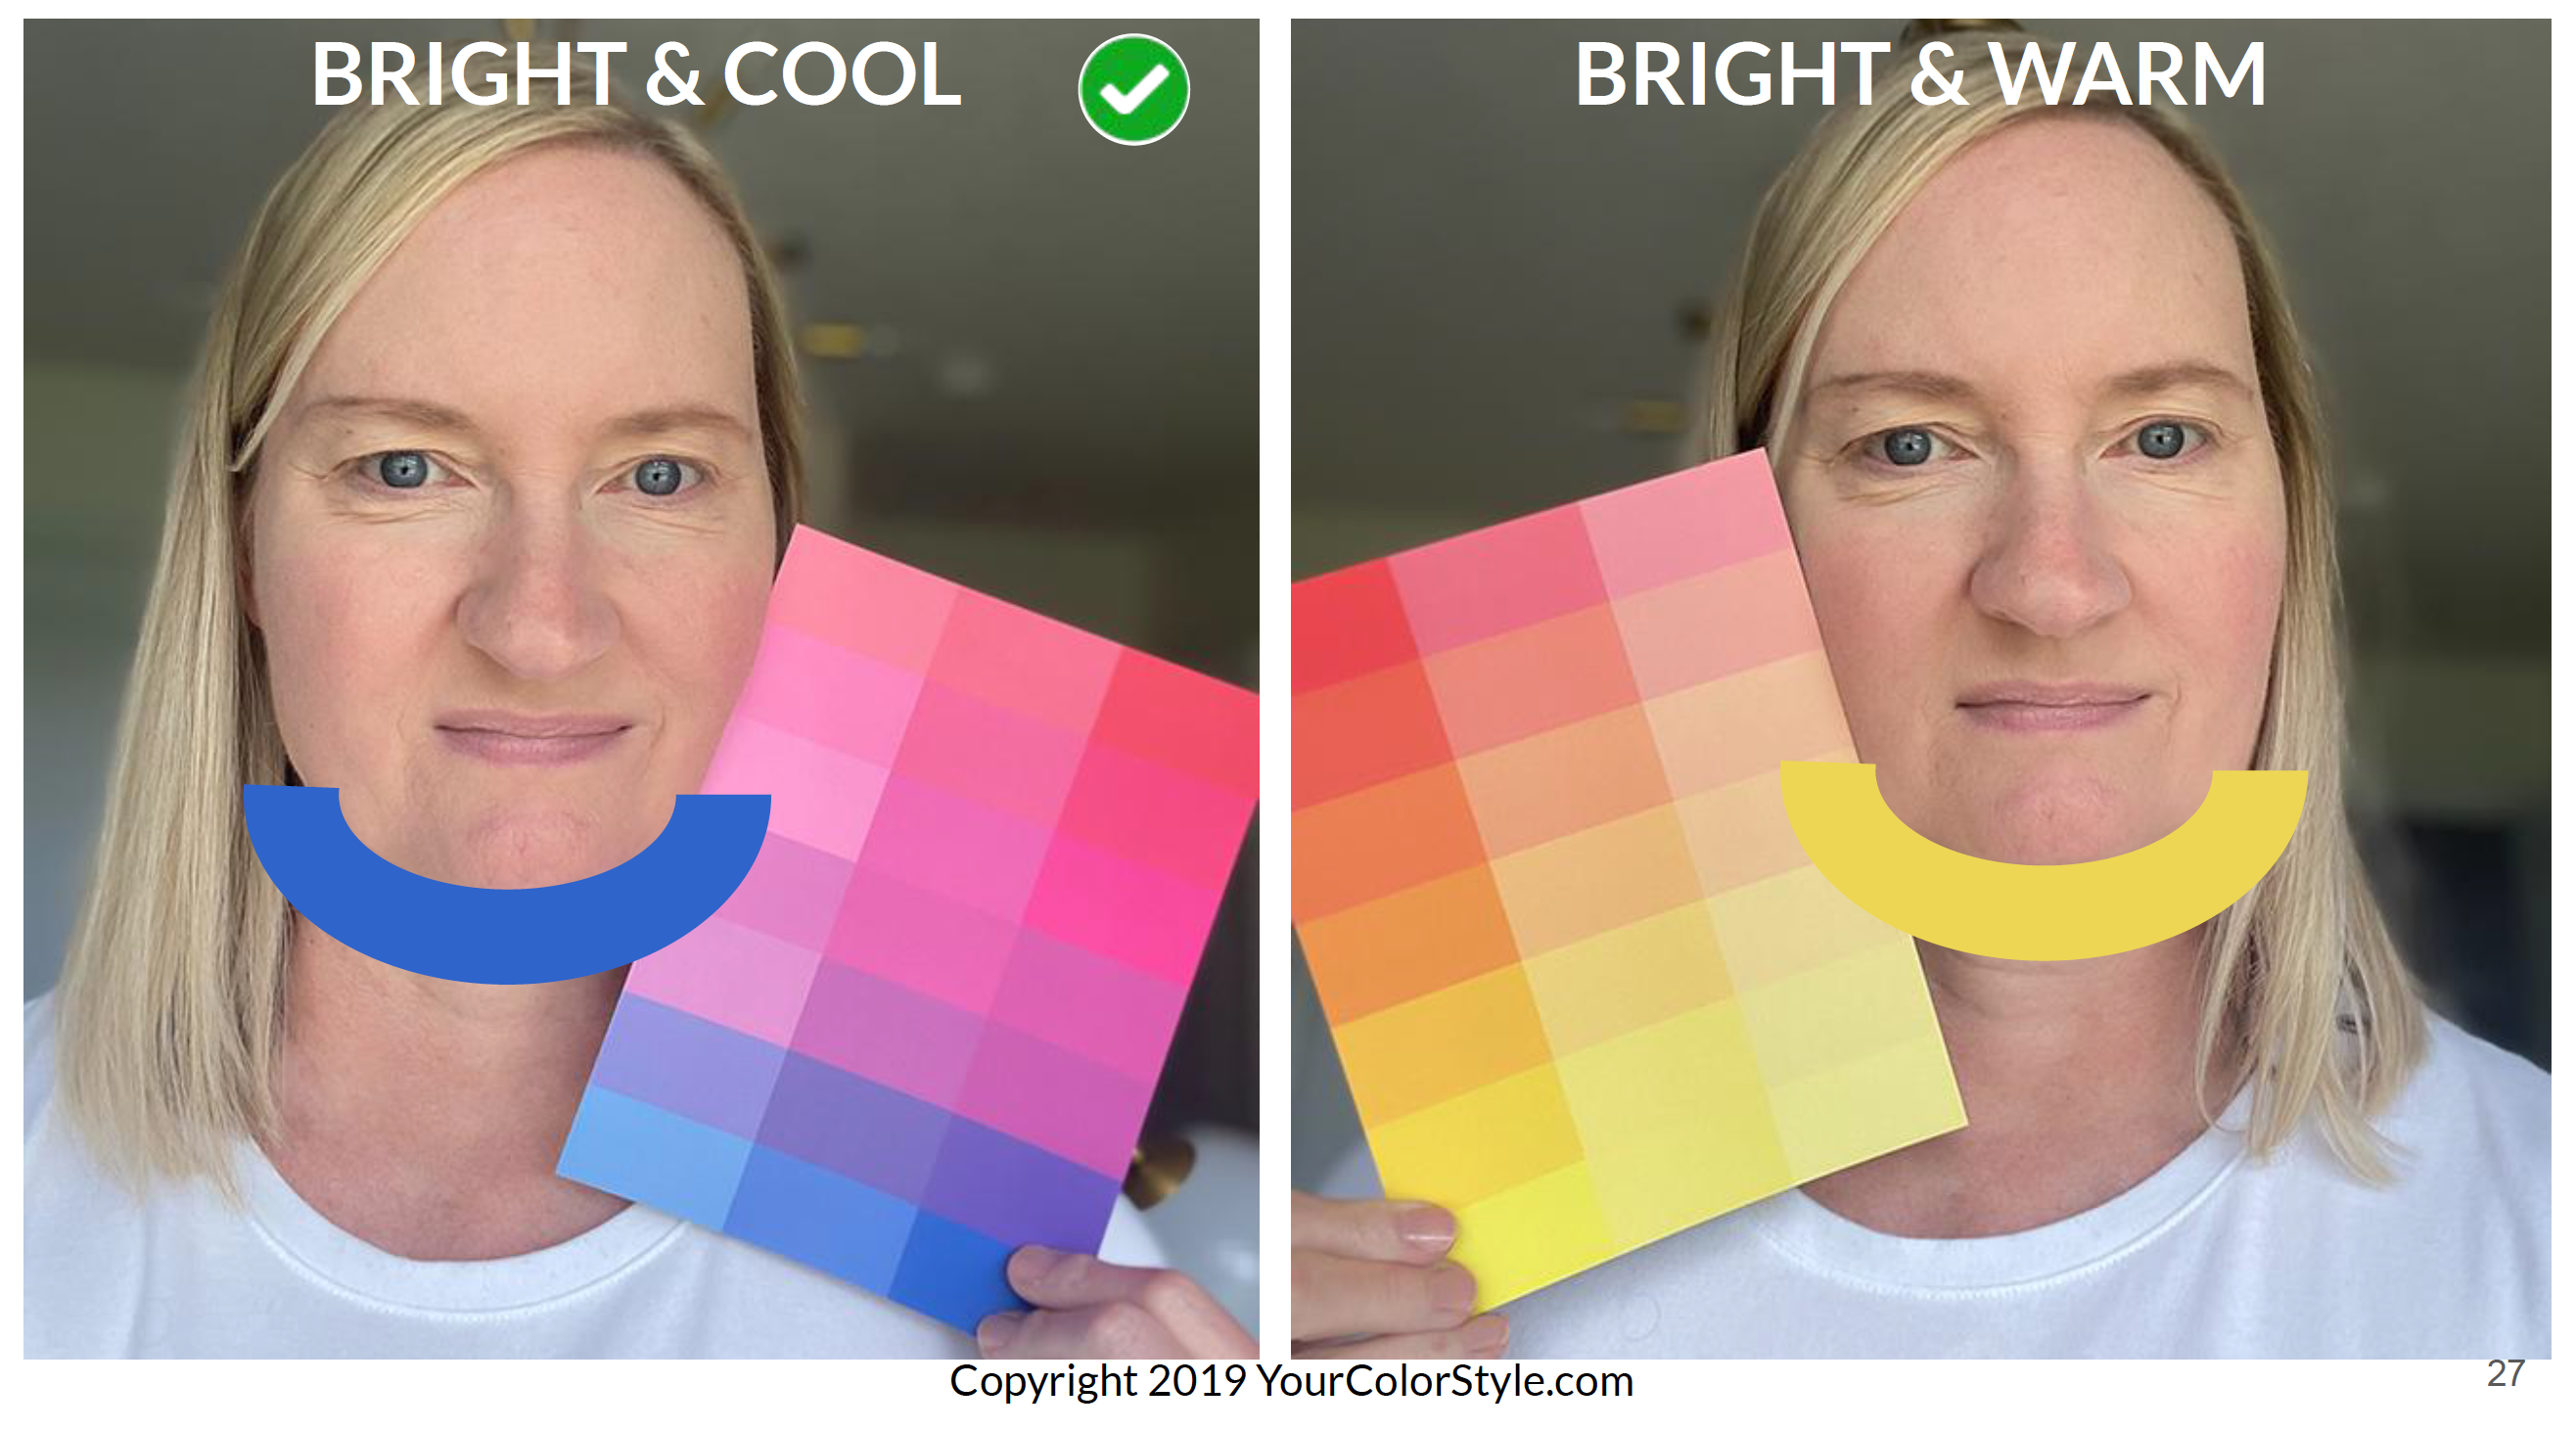 A helpful image on color theory, especially if you own the new KVD palette!